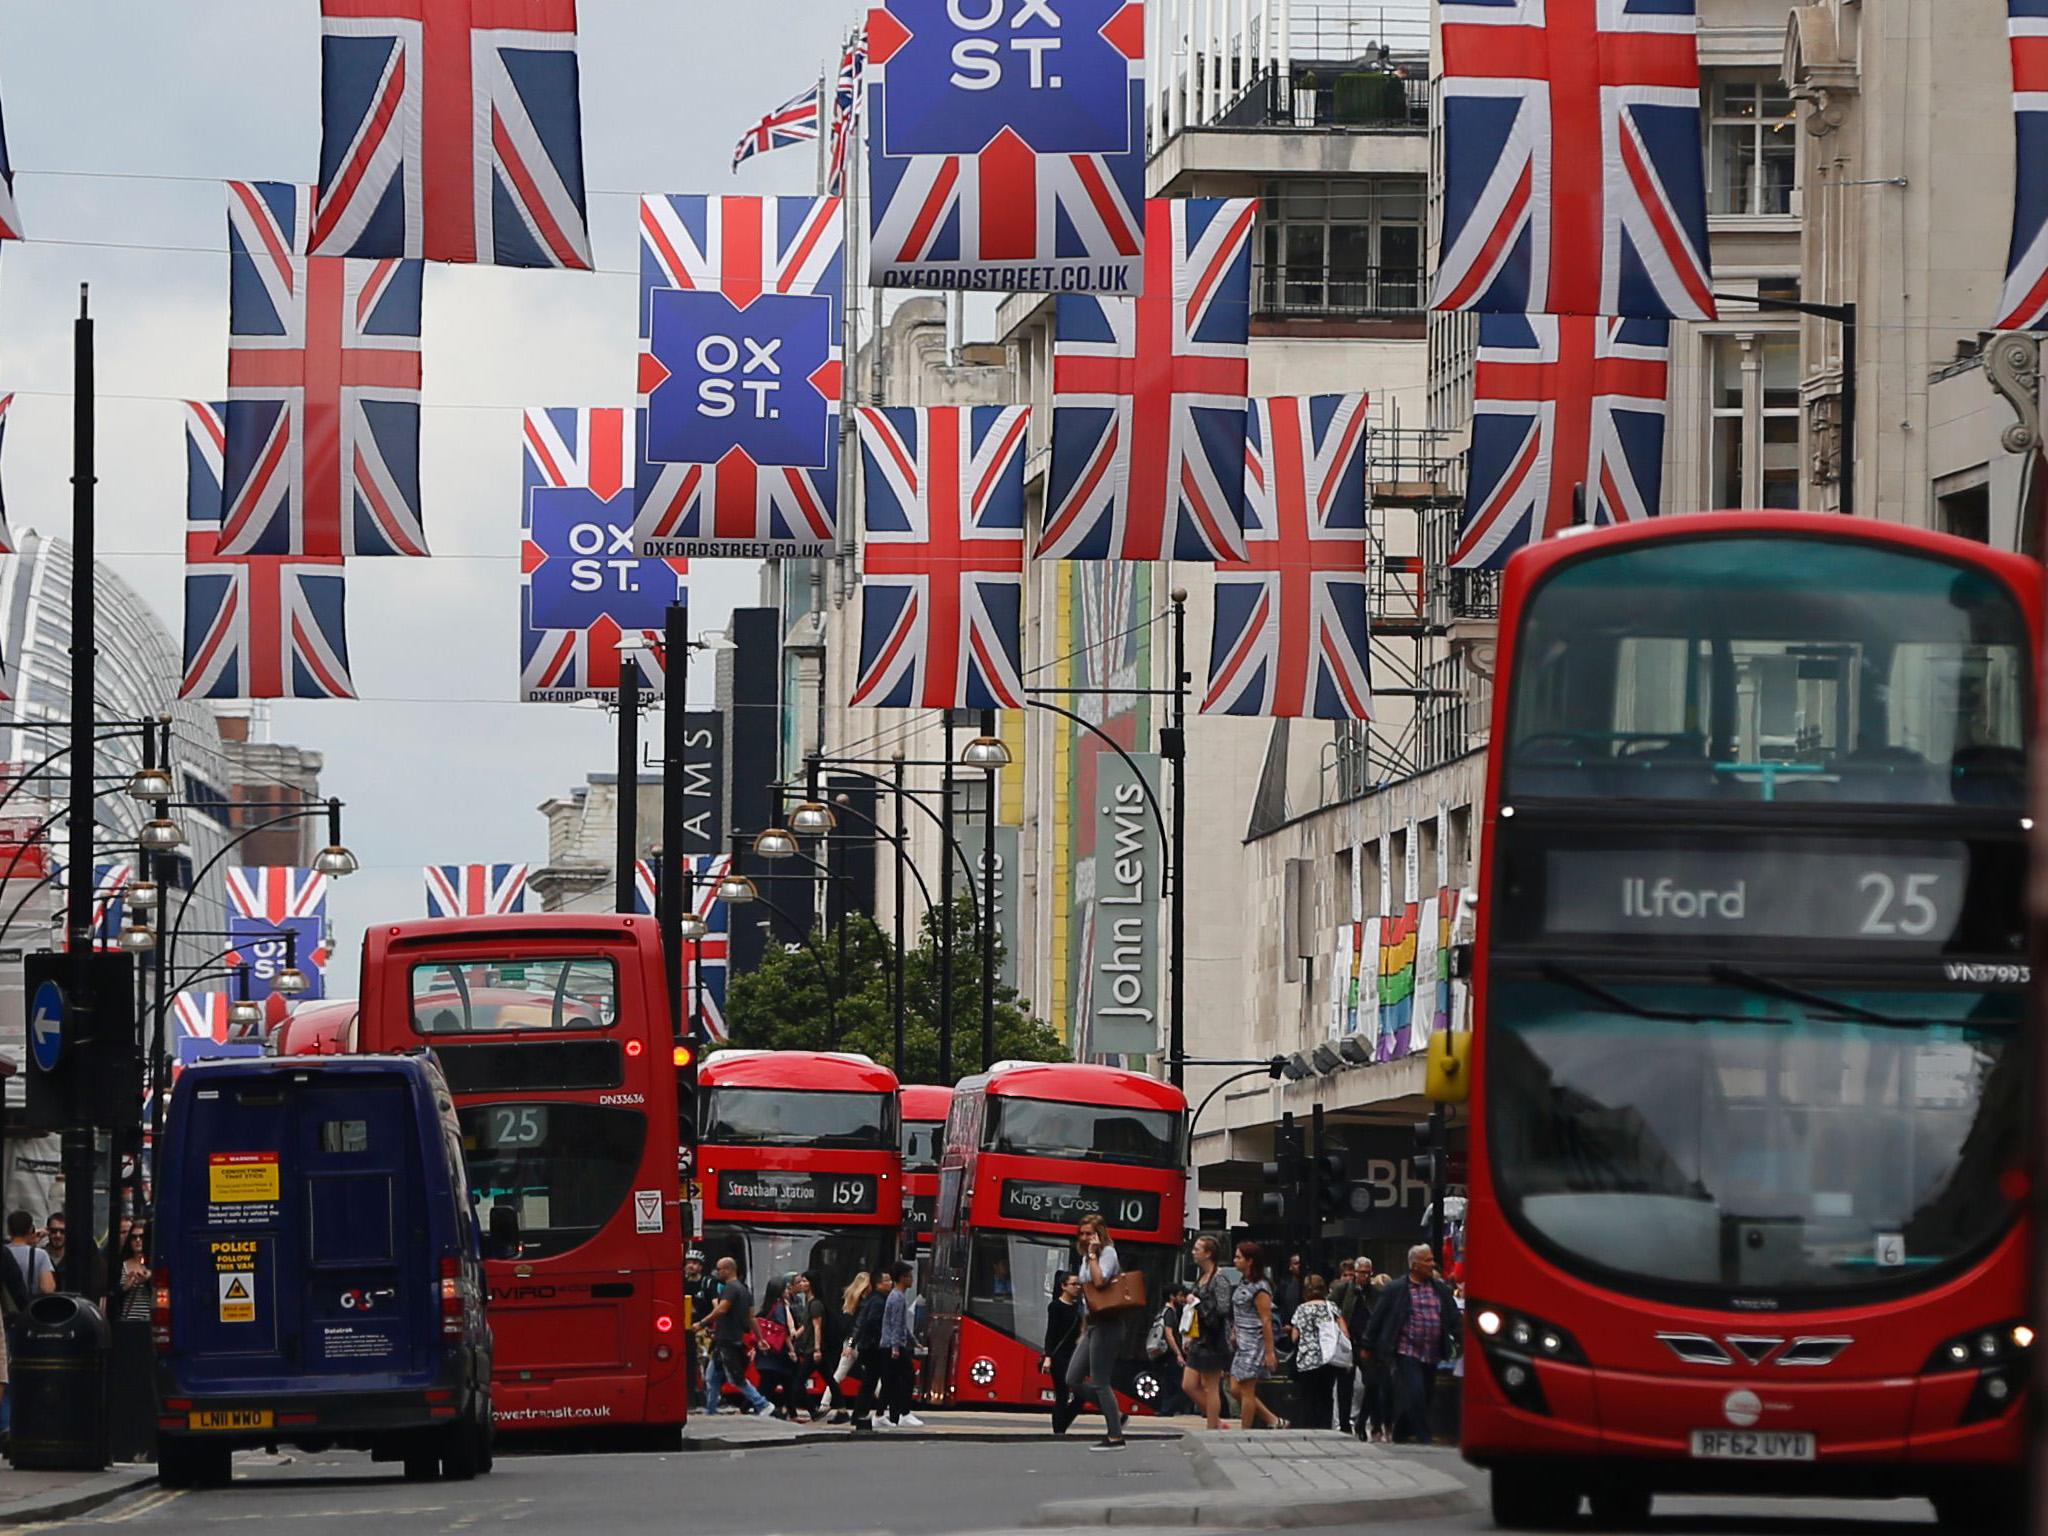 Oxford Street is believed to be the busiest and most polluted shopping street in Europe